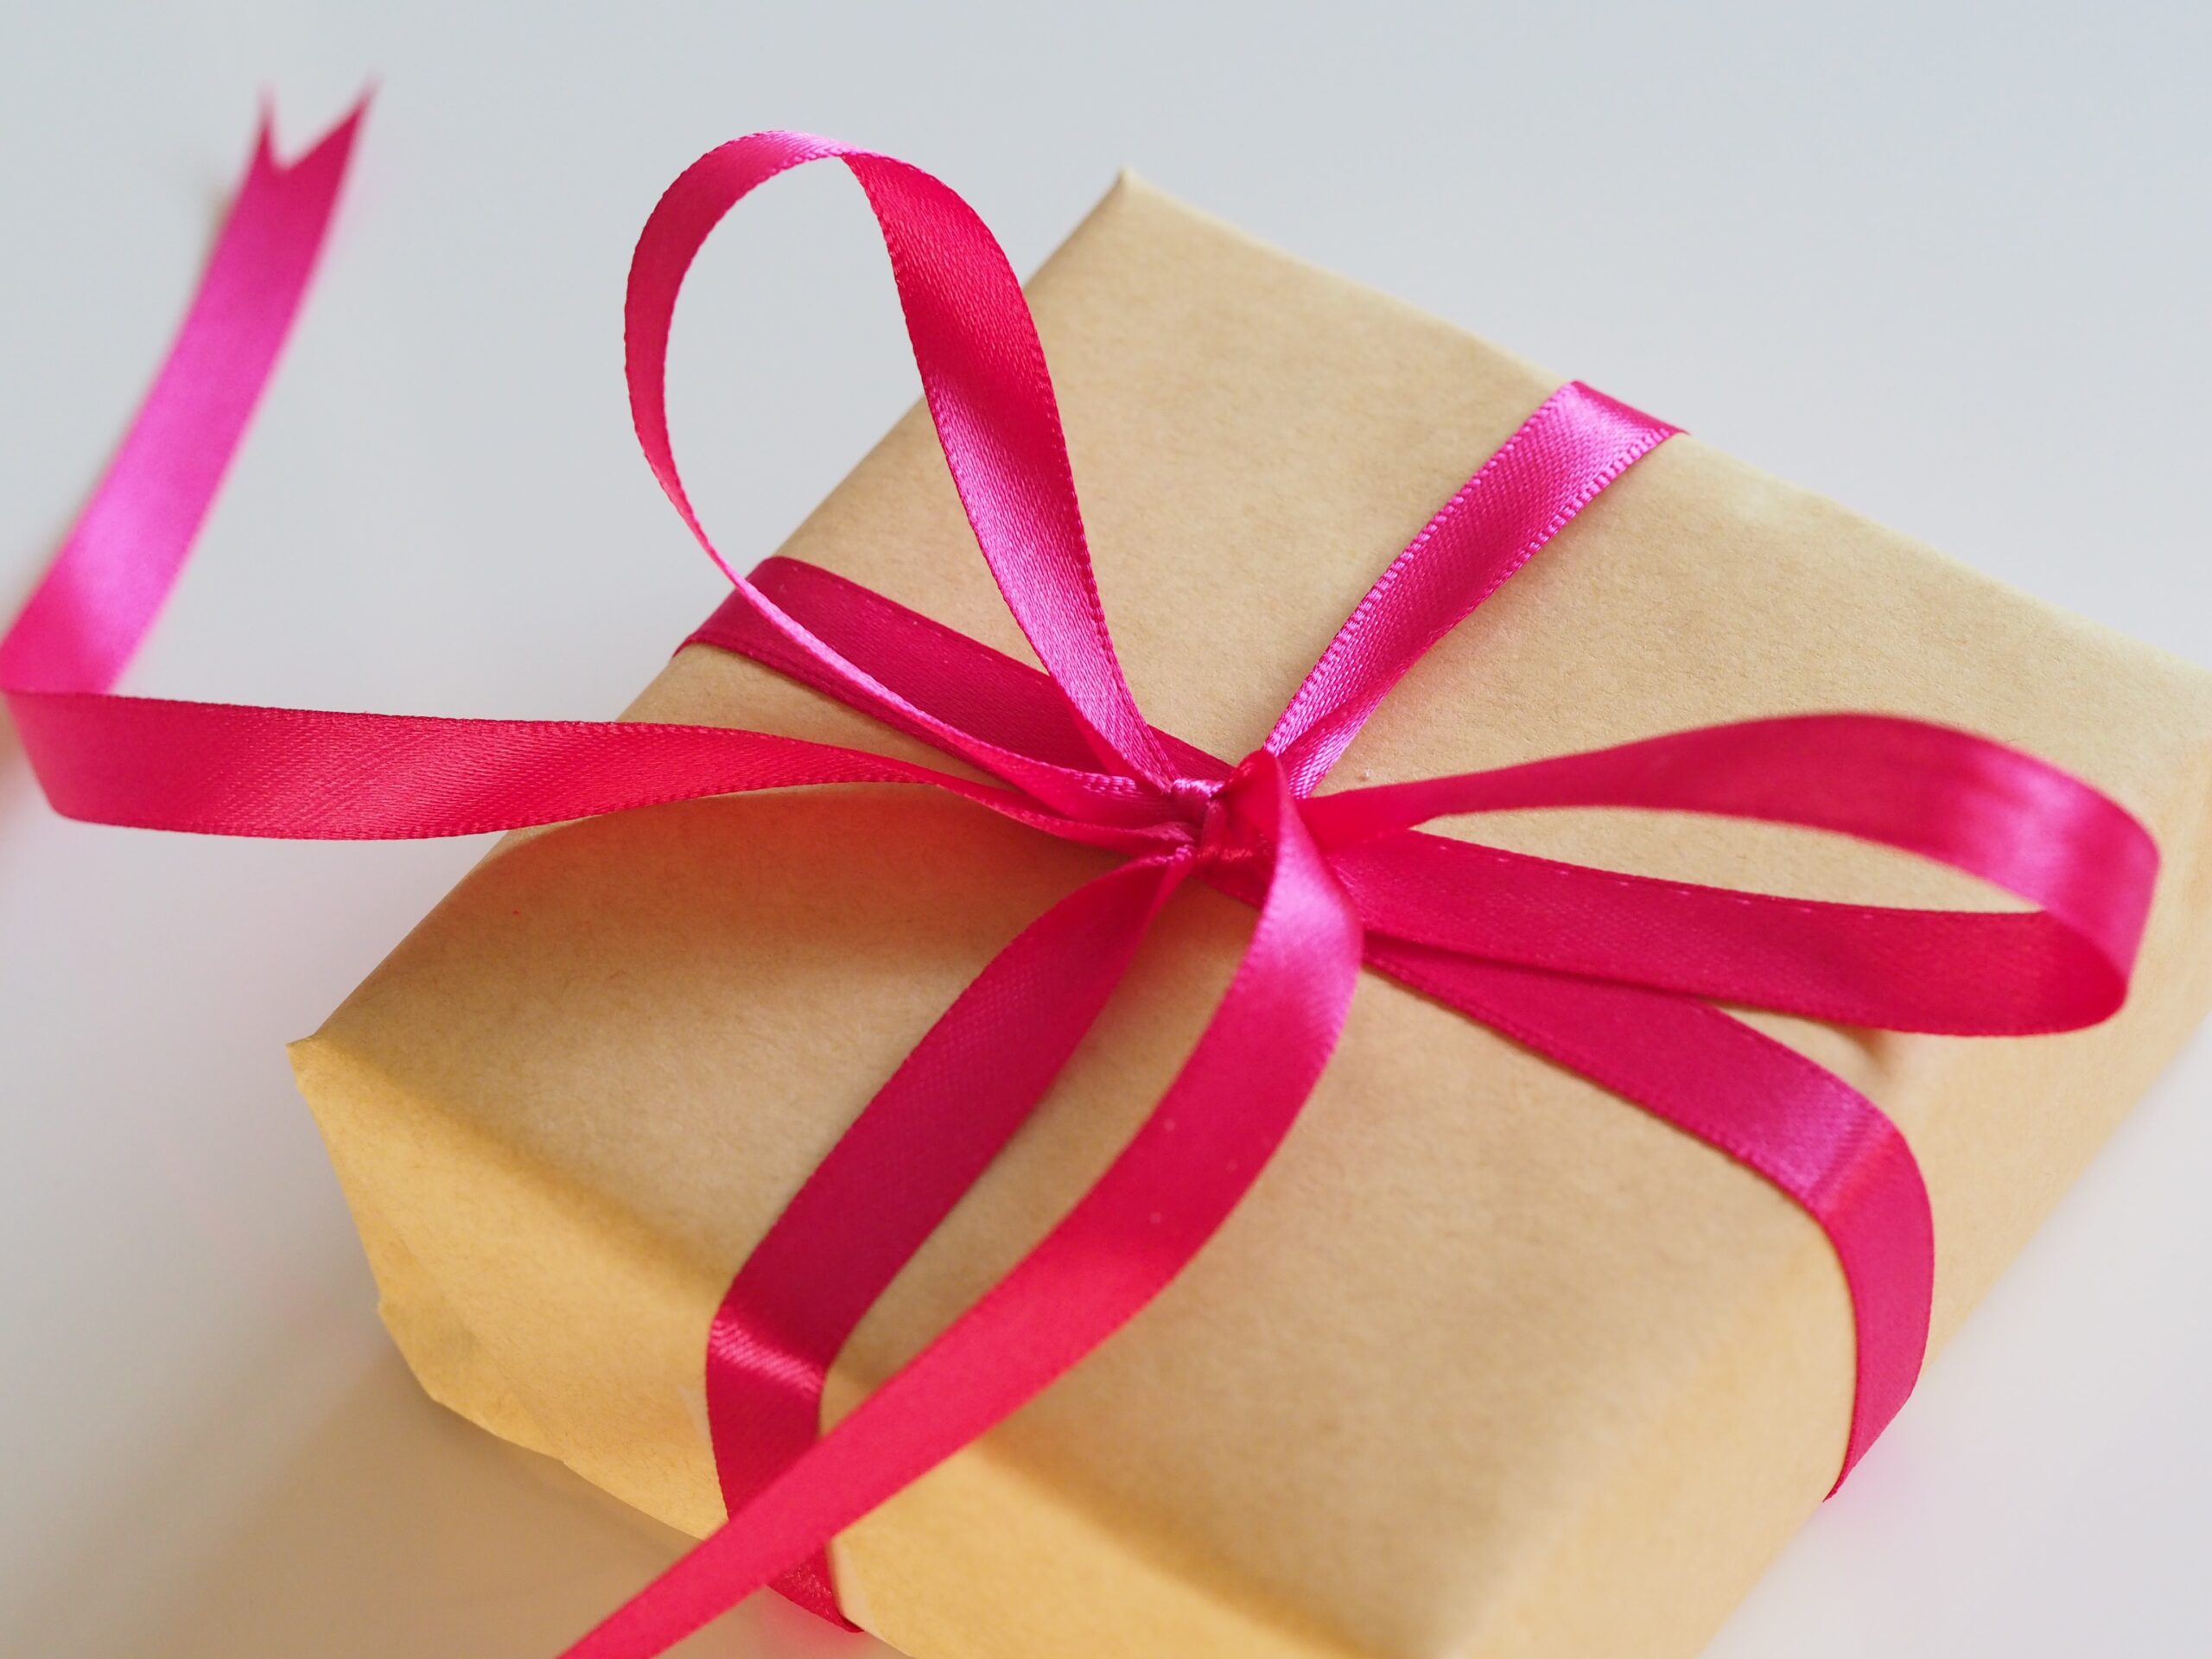 The picture shows a gift wrapped with a ribbon to represent charitable giving.